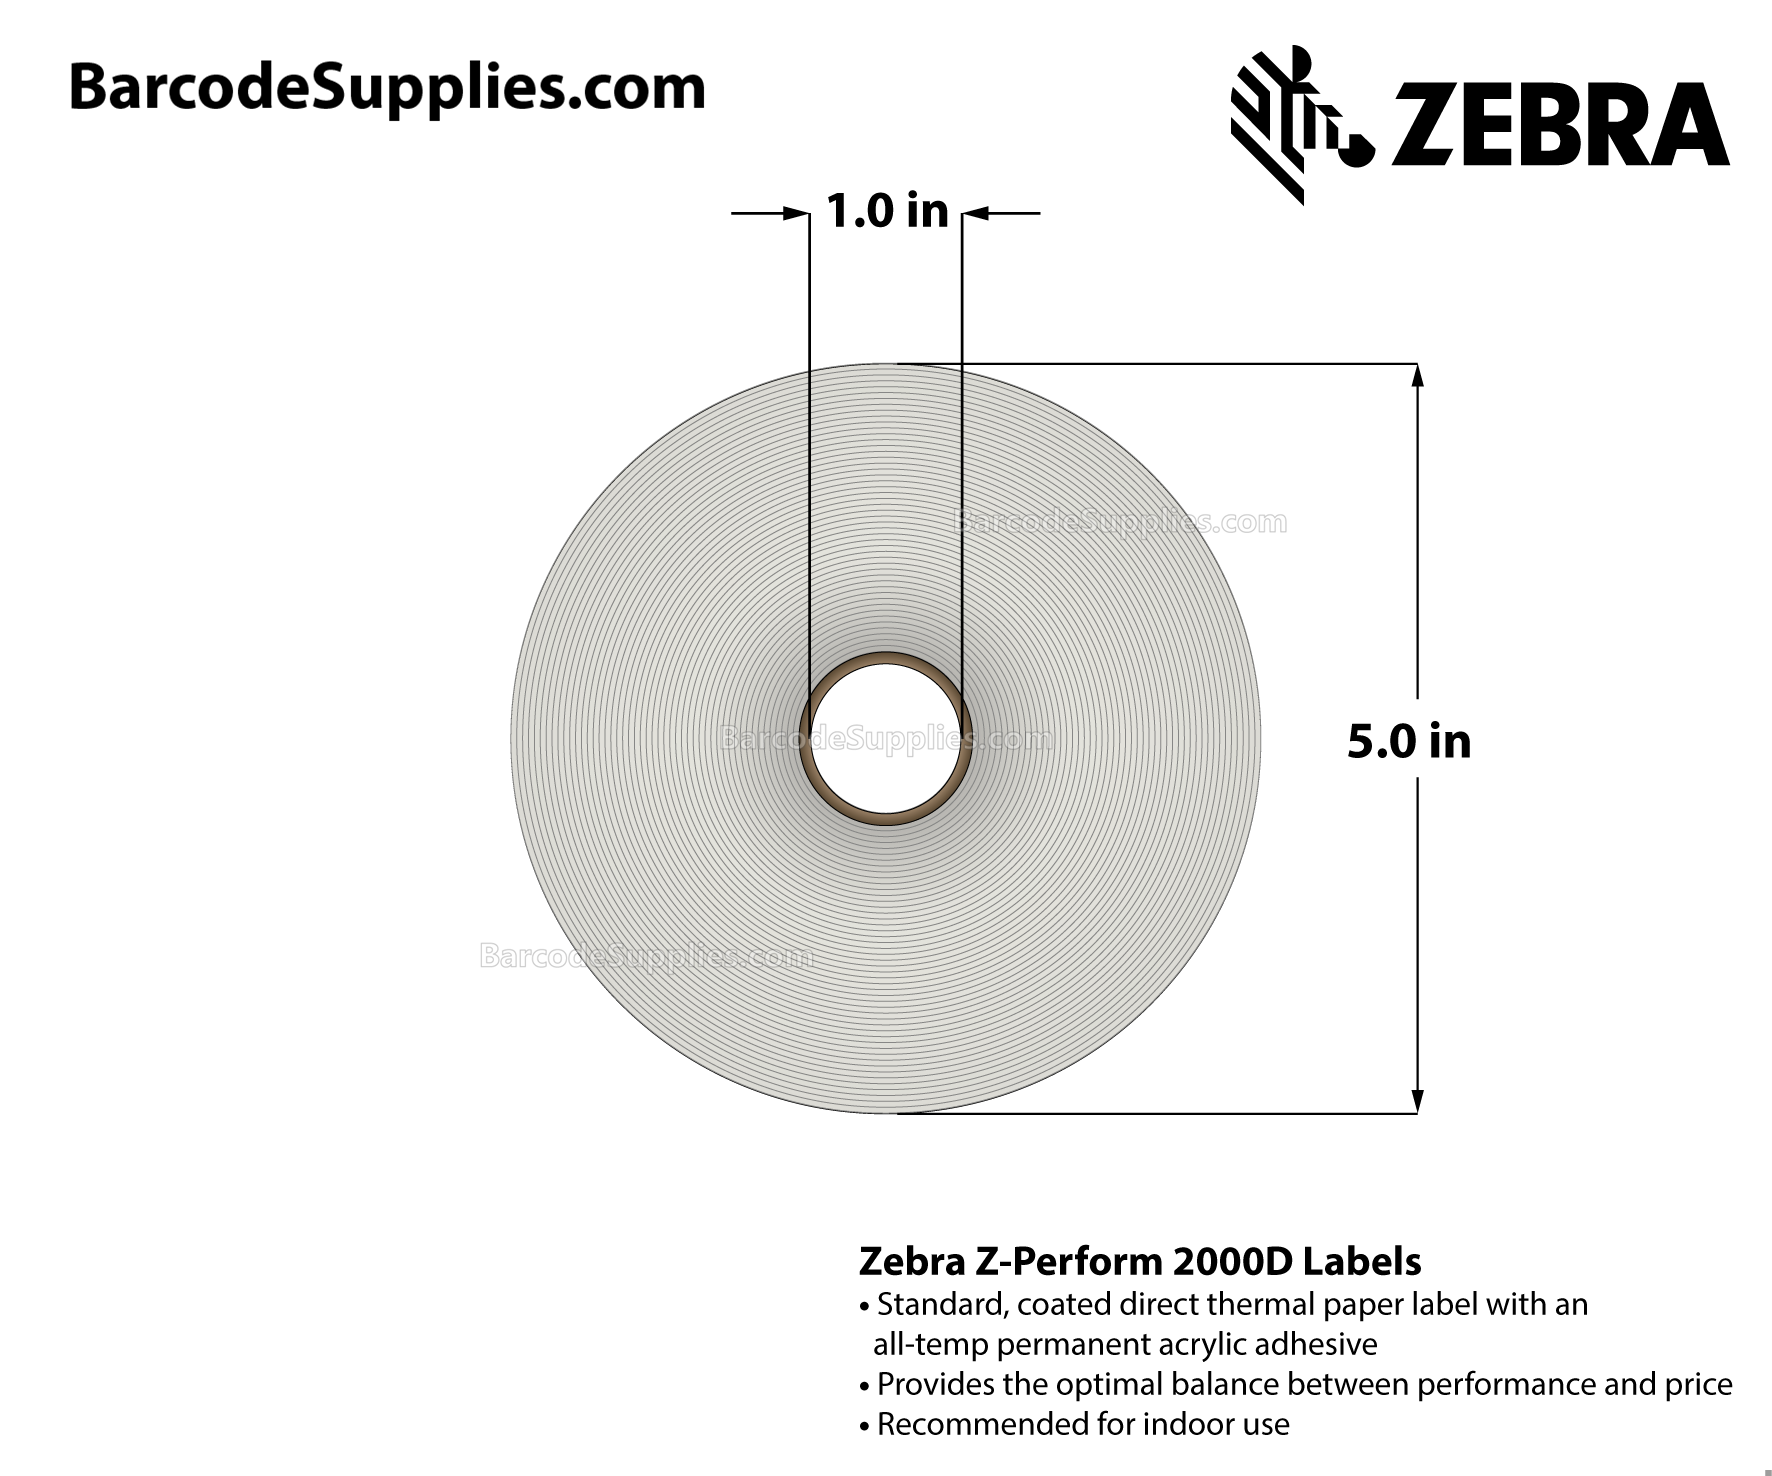 4 x 1.5 Direct Thermal White Z-Perform 2000D Labels With All-Temp Adhesive - Perforated - 1620 Labels Per Roll - Carton Of 6 Rolls - 9720 Labels Total - MPN: 10015786